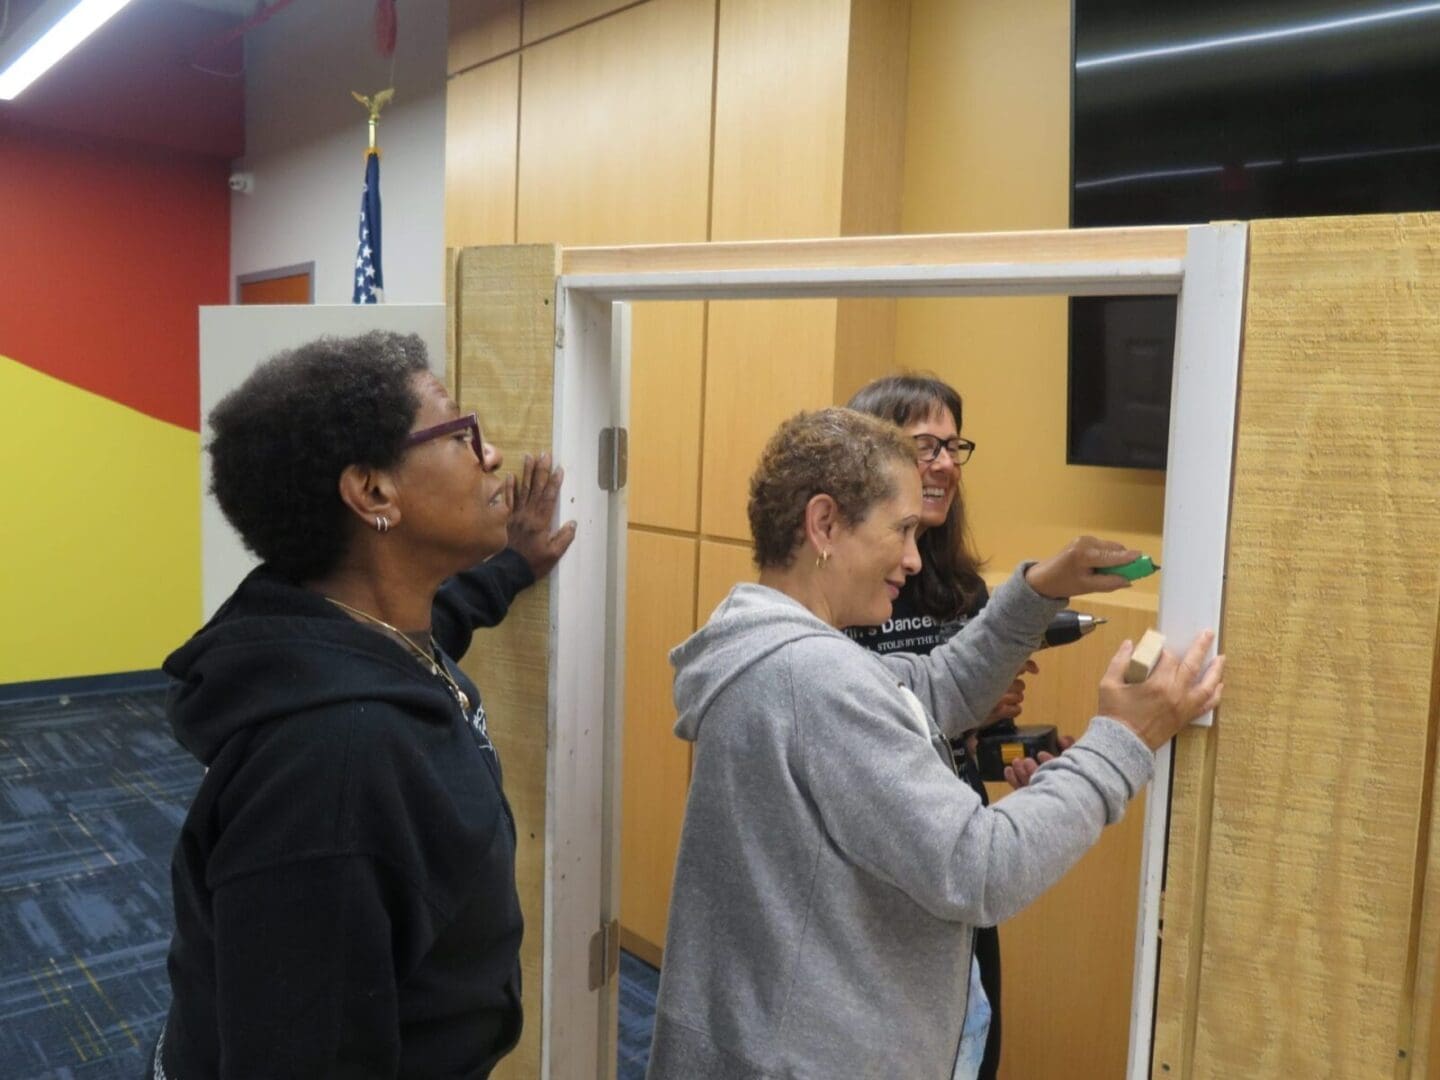 A group of people working on a door in a gallery room.